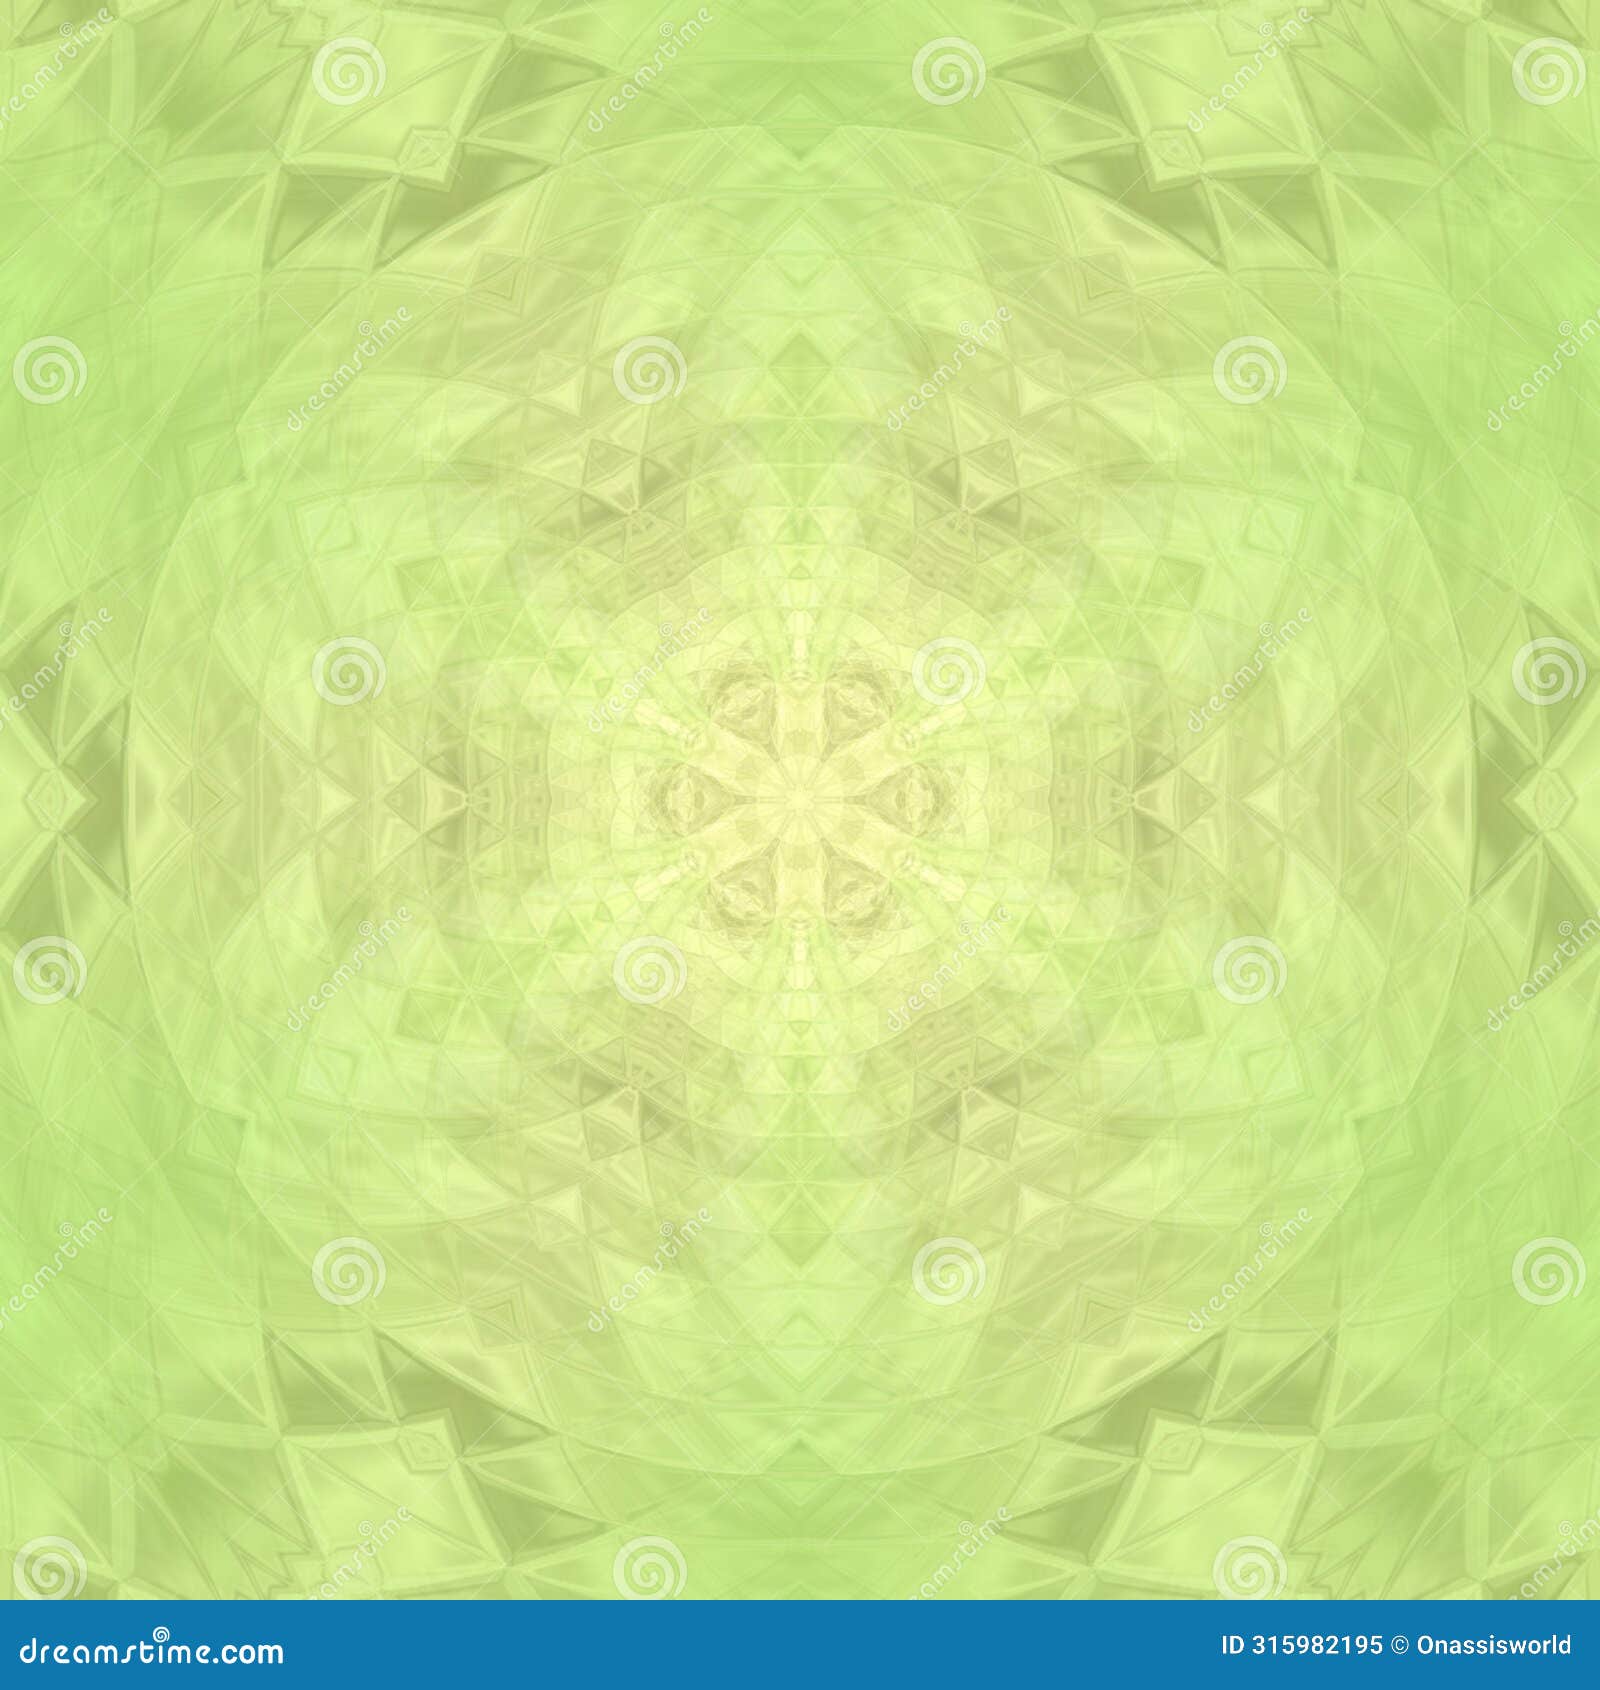 lemonade background abstract s blurs